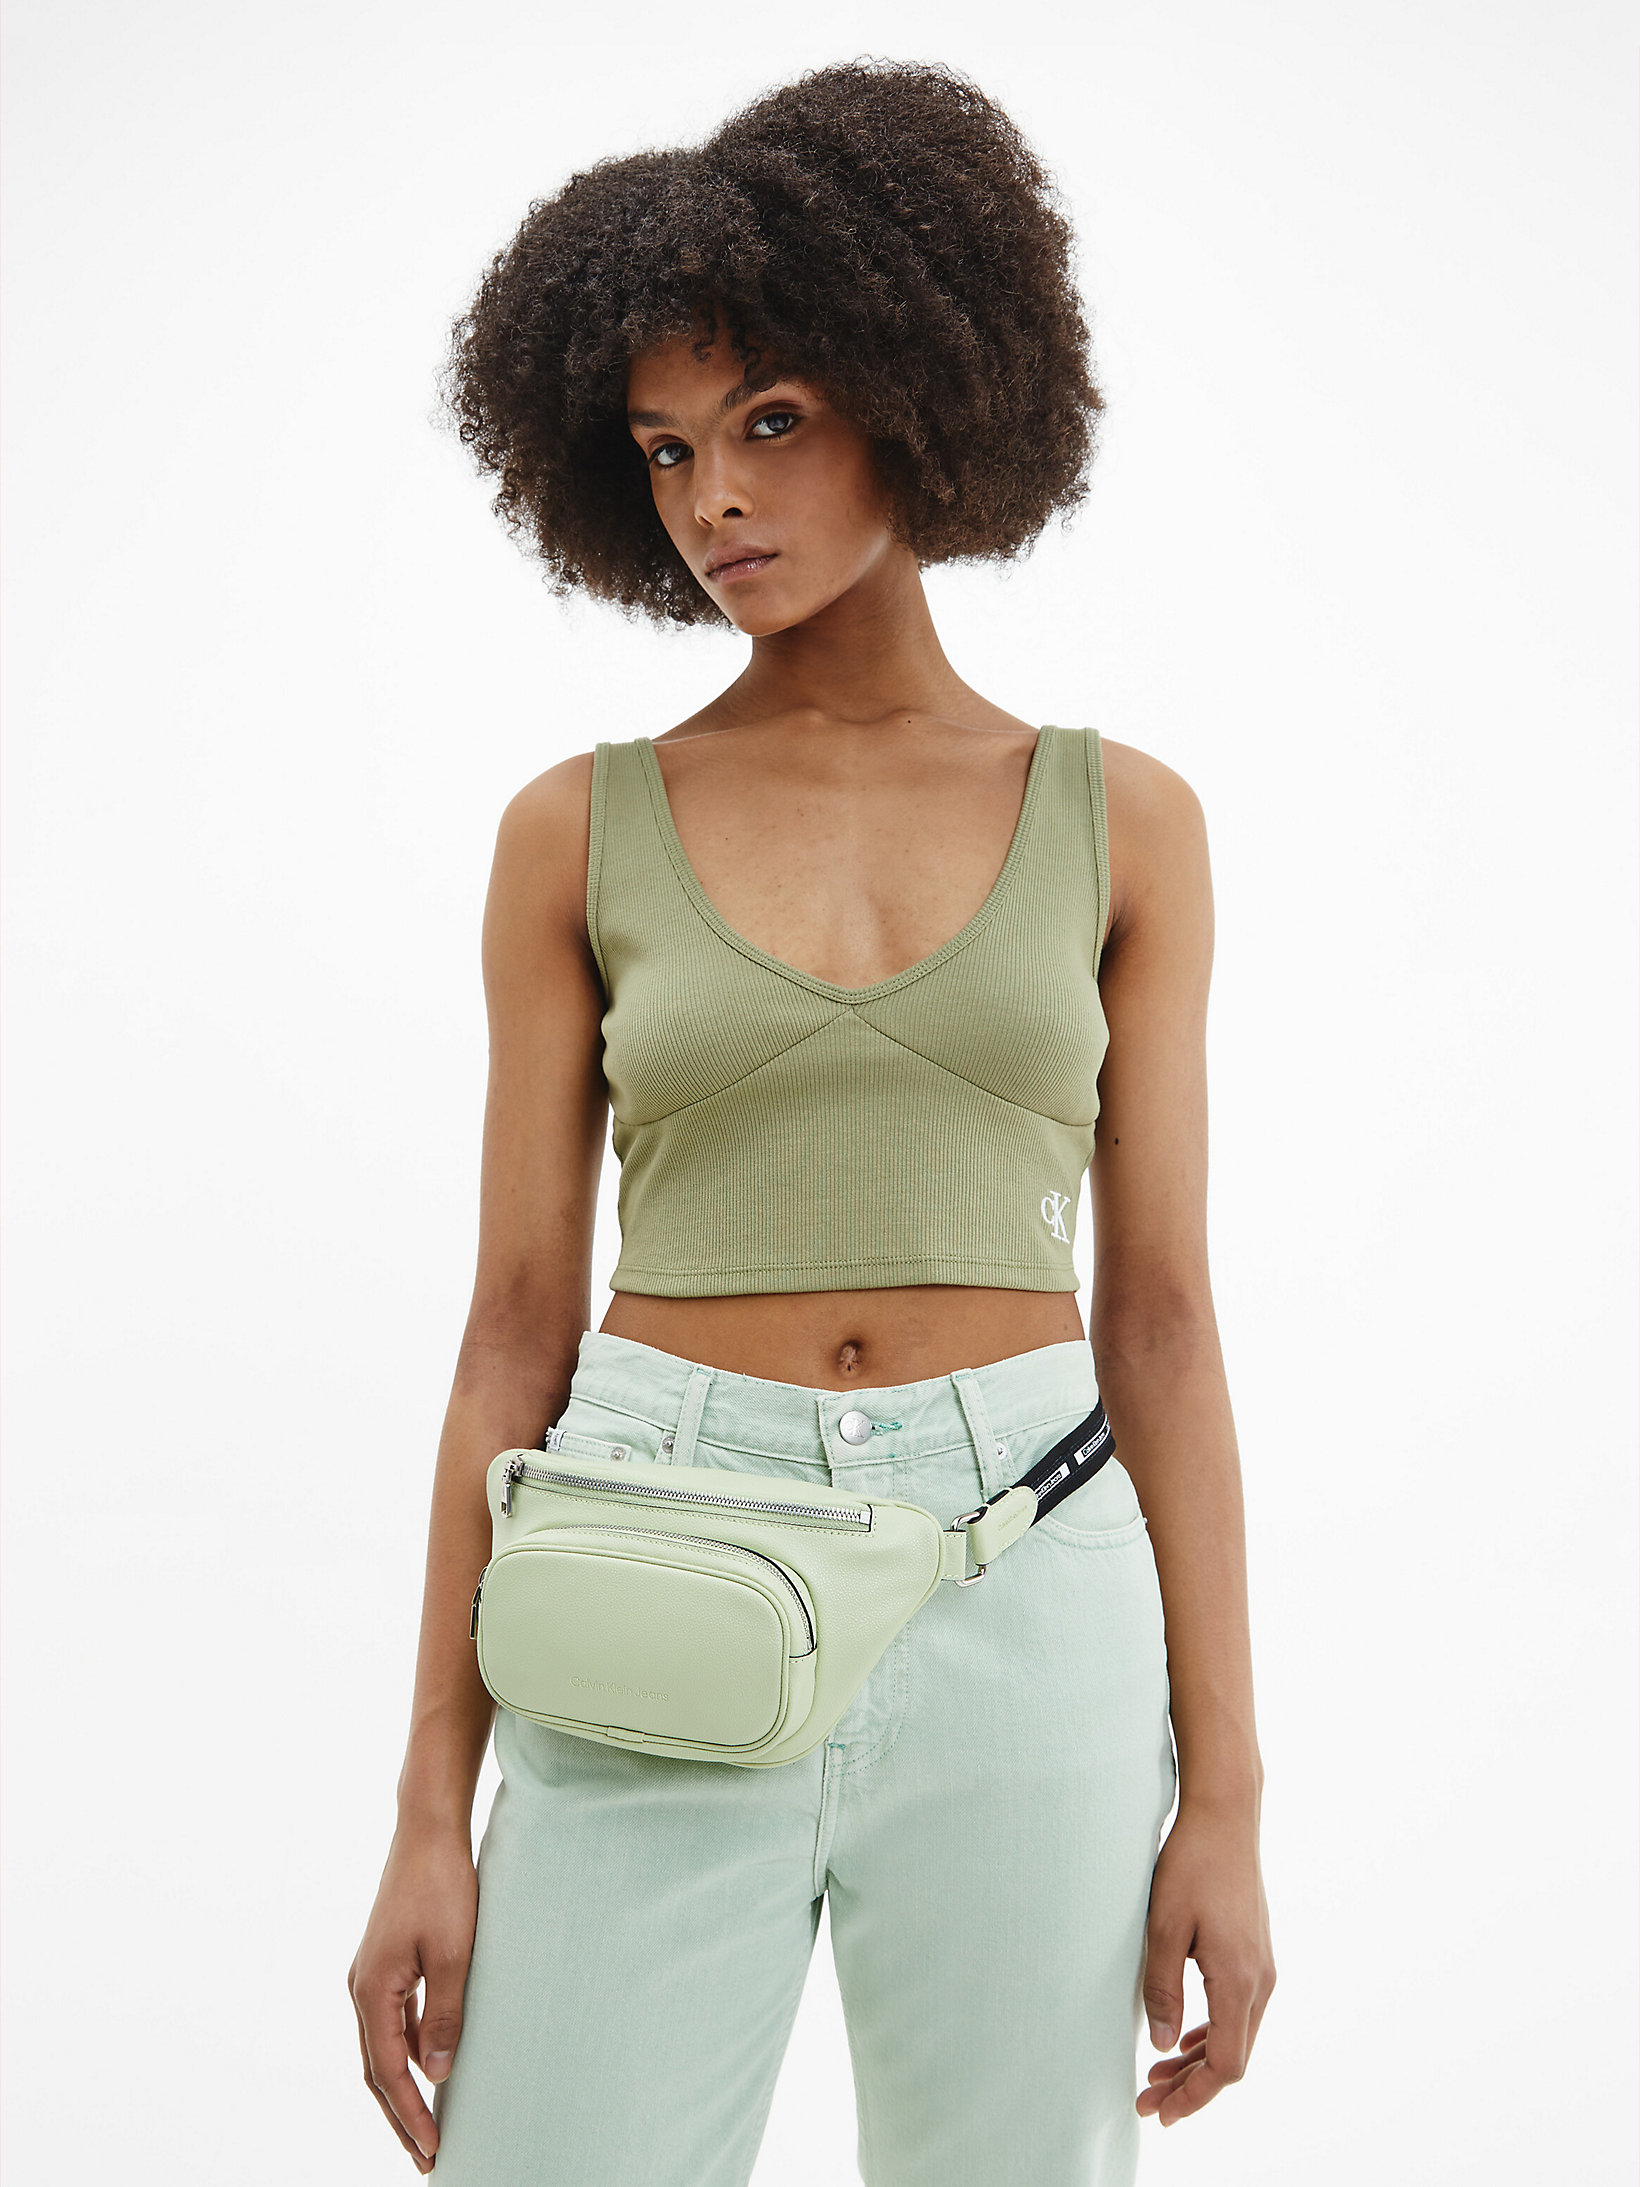 Camiseta De Tirantes Slim Cropped De Canalé > Faded Olive > undefined mujer > Calvin Klein